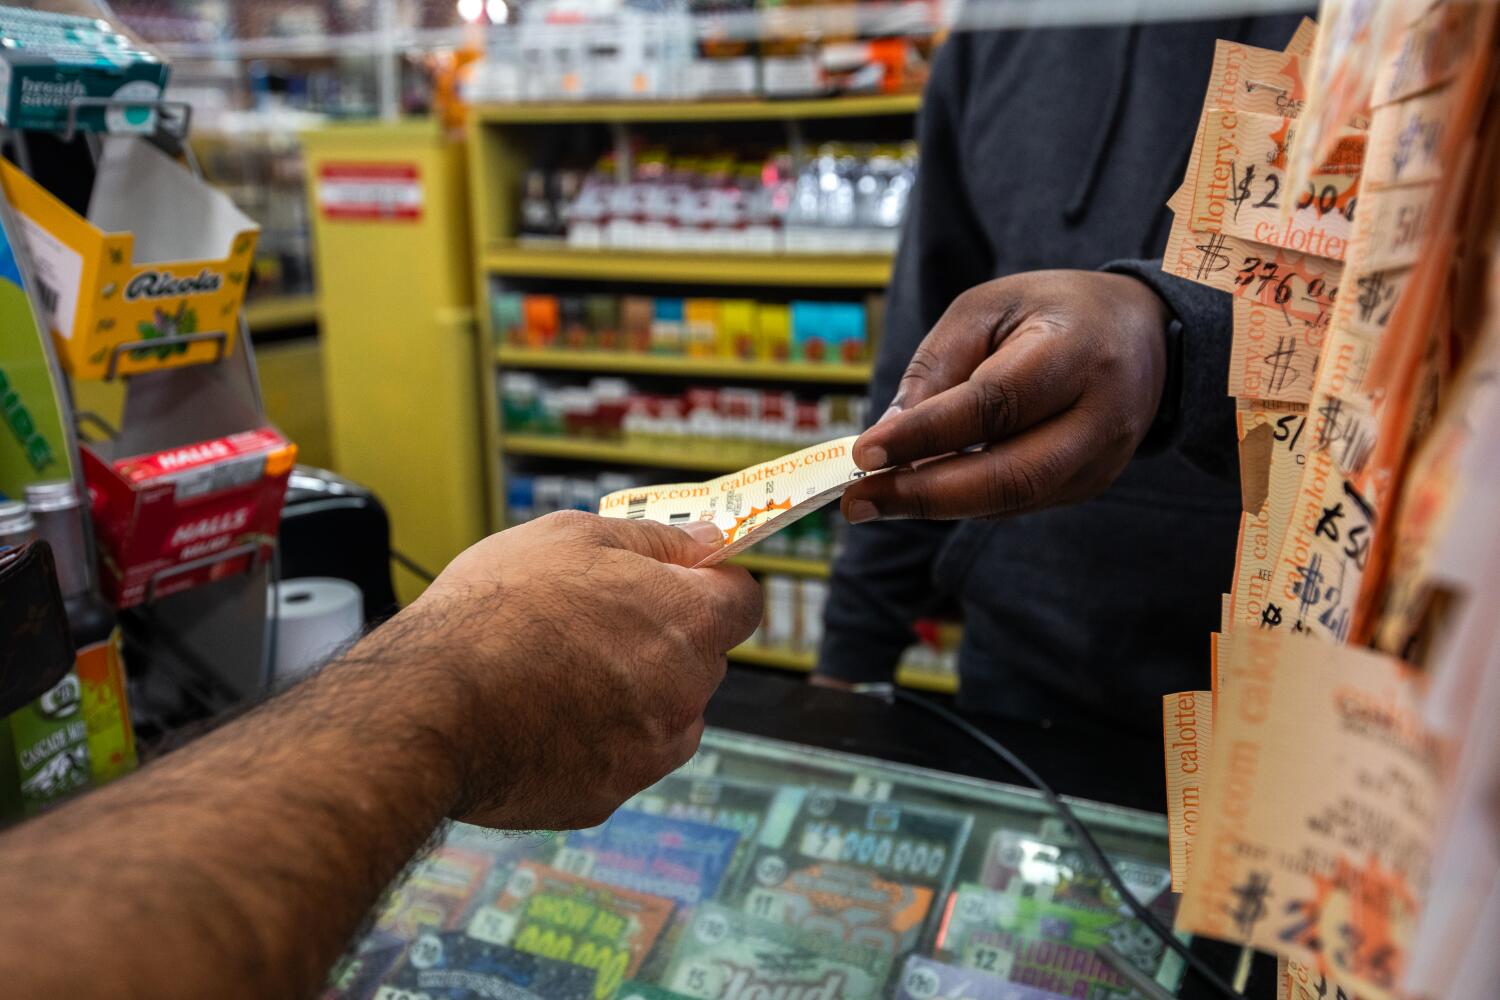 Powerball jackpot at $1.04 billion, with the next chance to win on Monday night